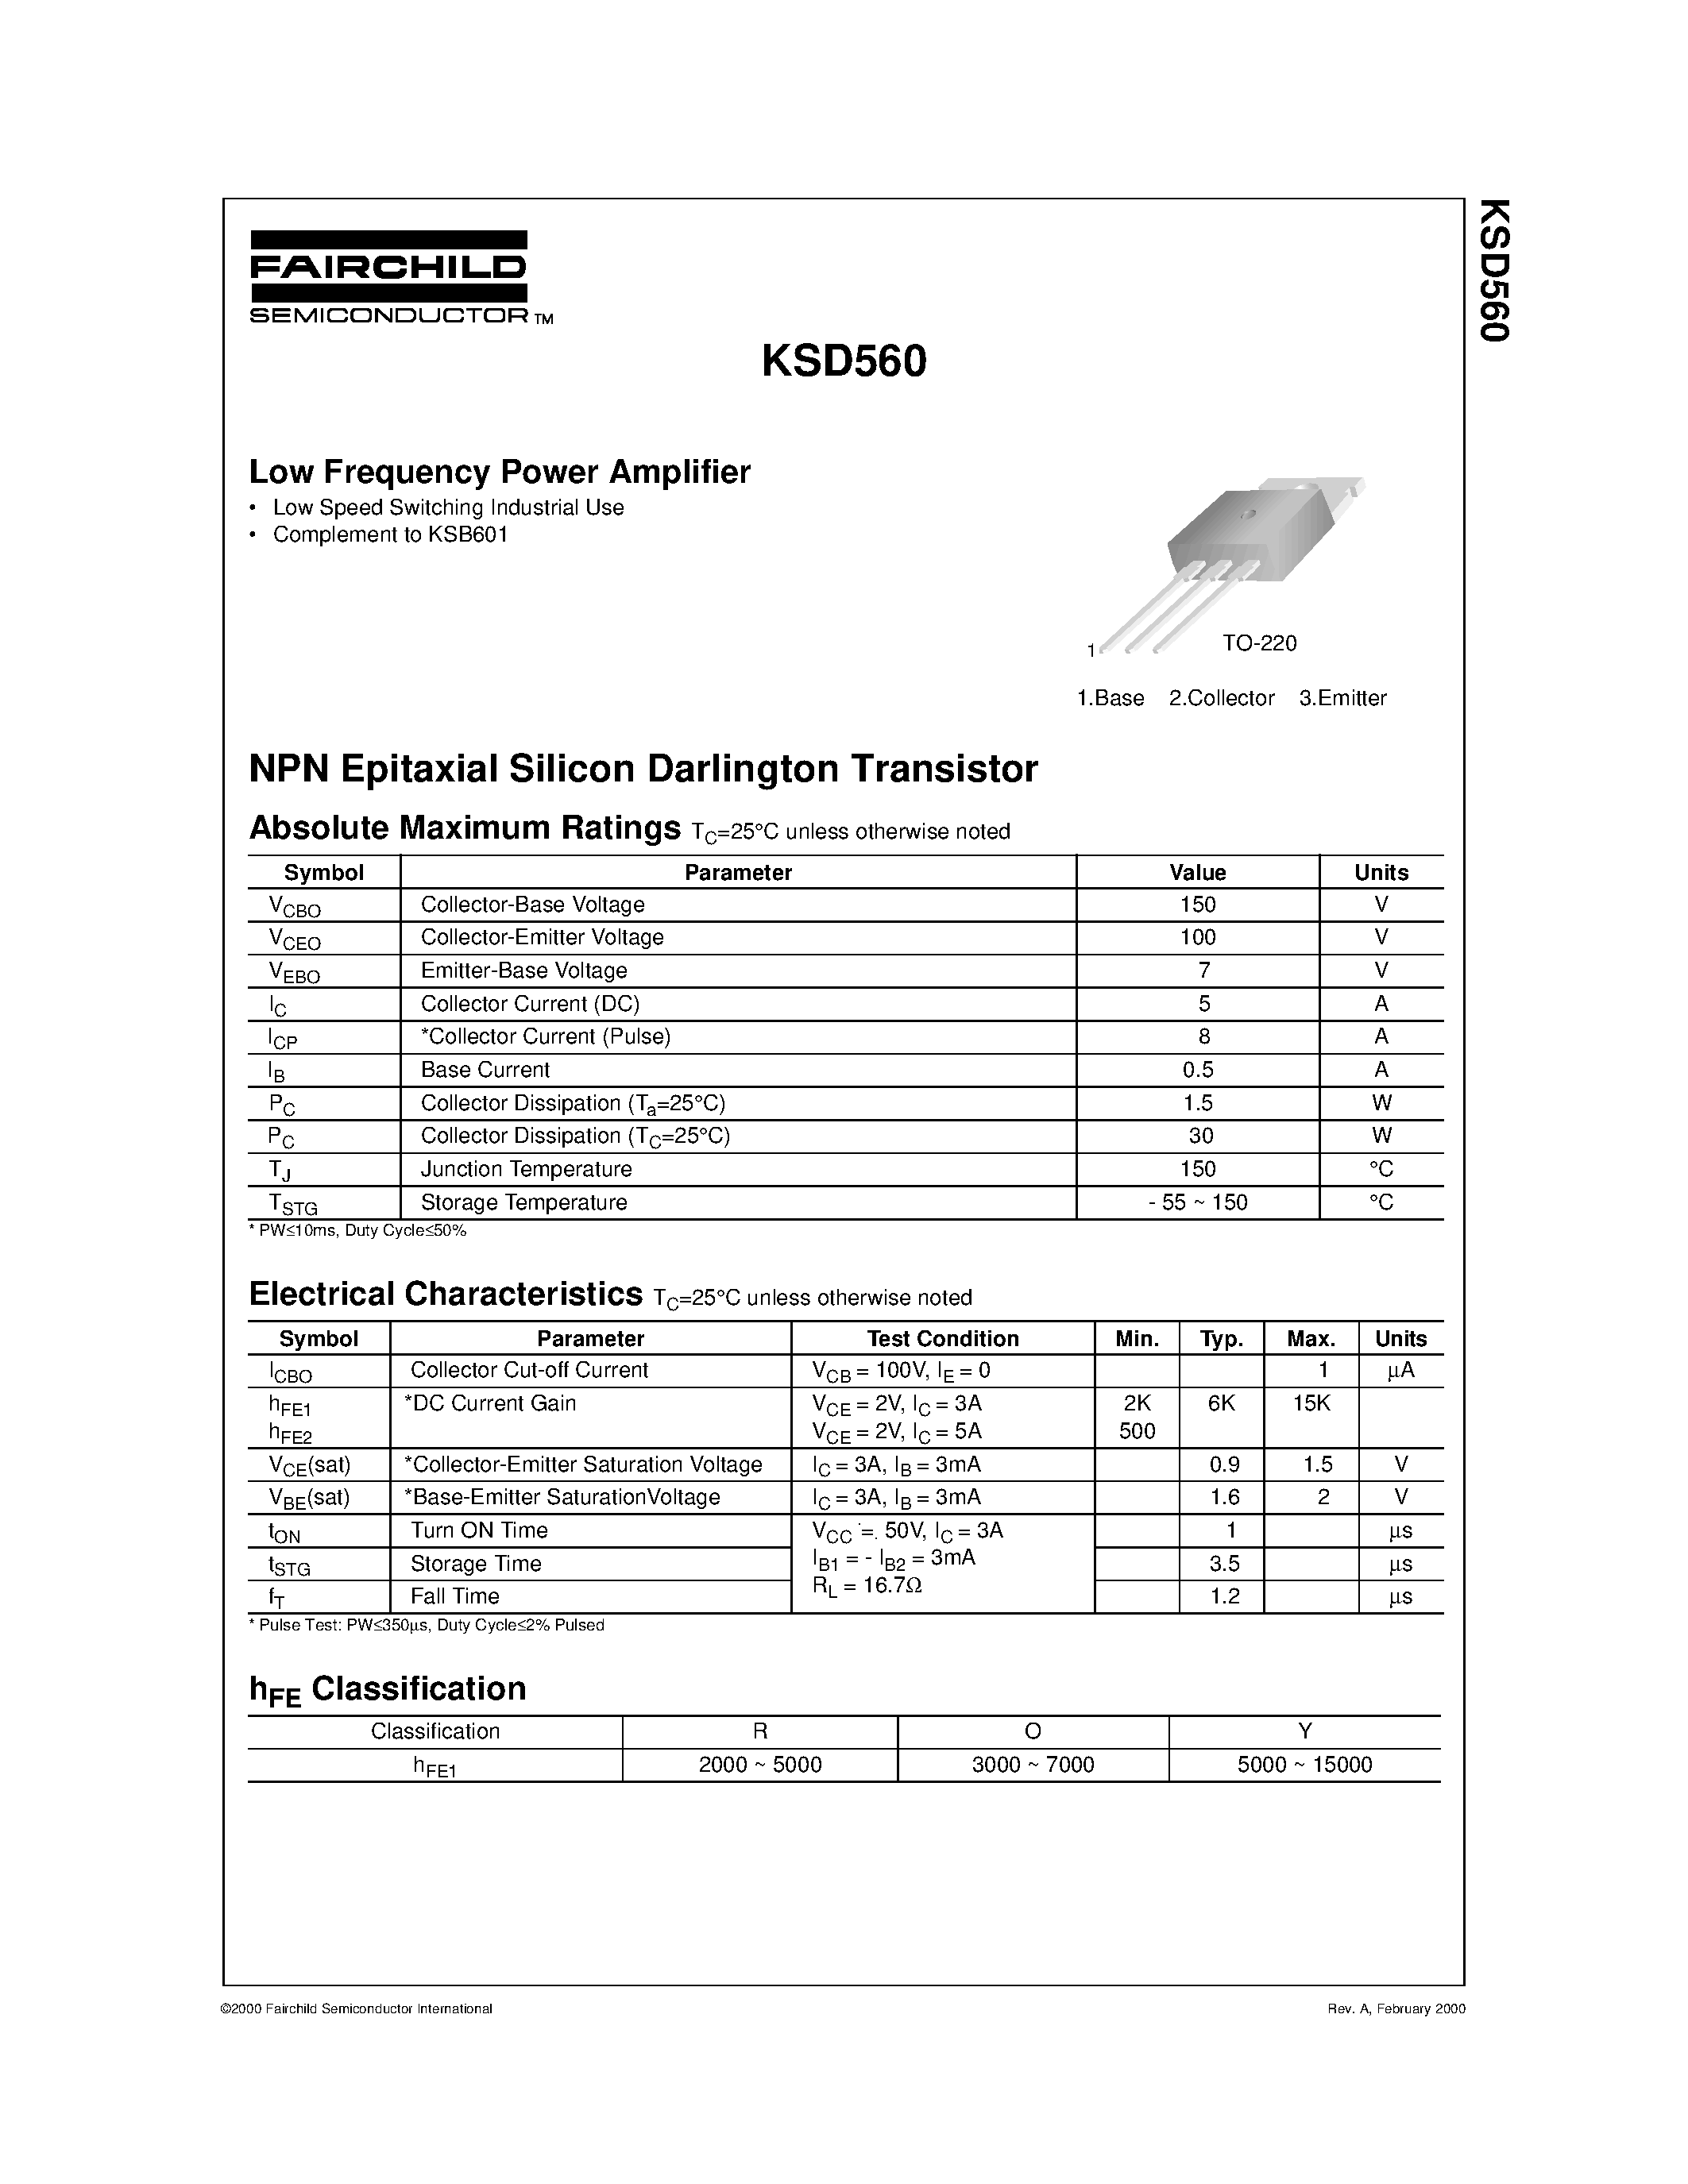 Datasheet KSD560 - Low Frequency Power Amplifier page 1